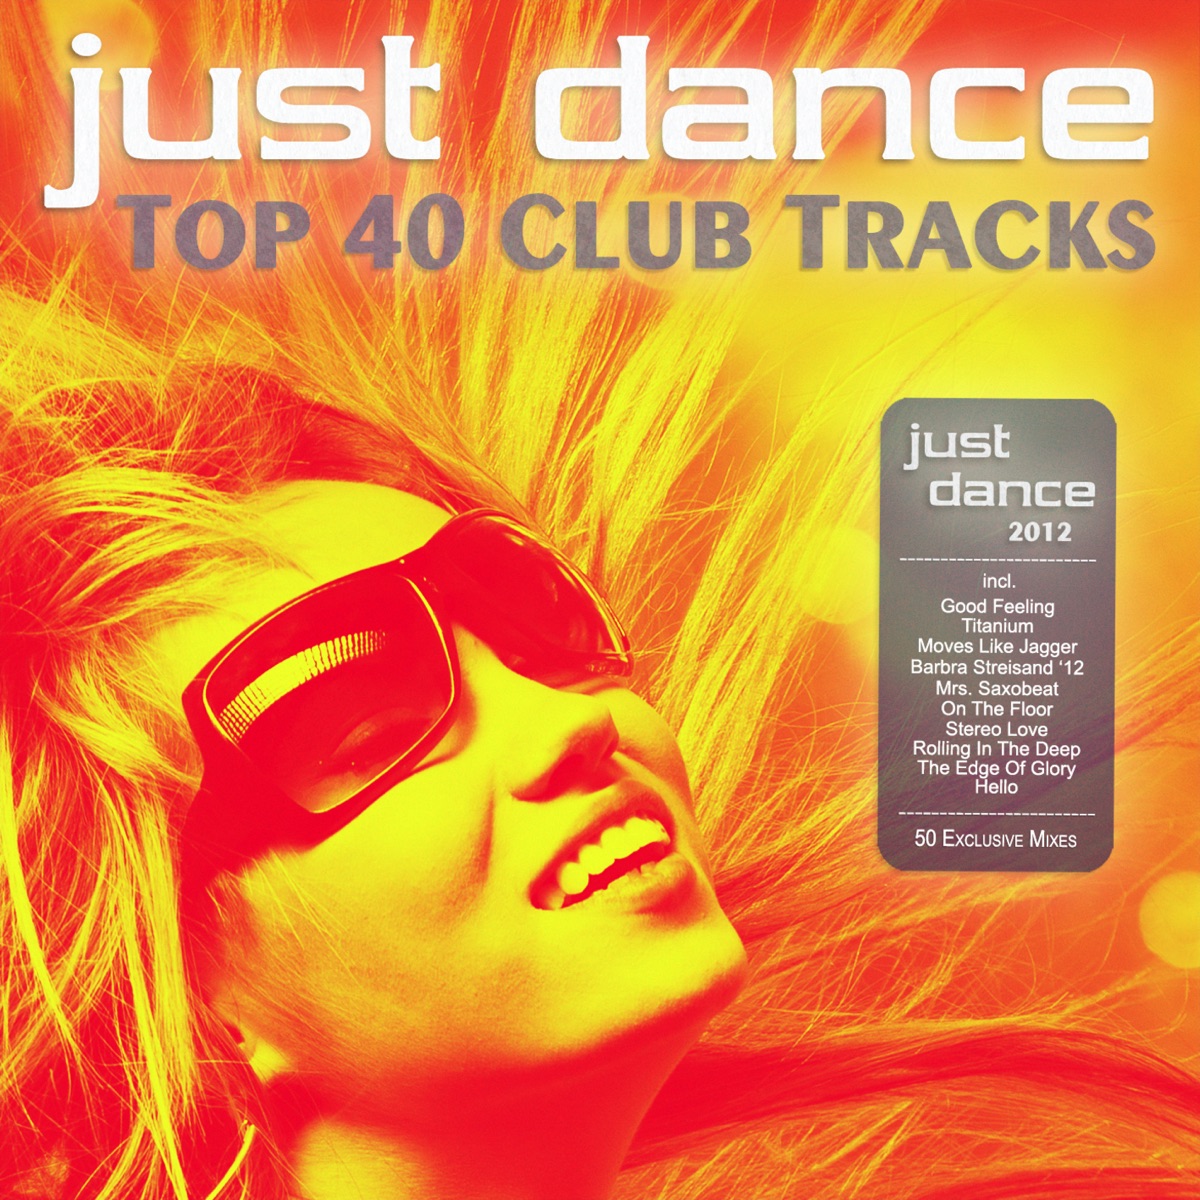 Dance Hits 2000 – 2010 – Essential Club Anthems – 40 Massive Hits - The  Very Best Of EDM, Ibiza, House, R&B & Latin - Compilation by Various  Artists